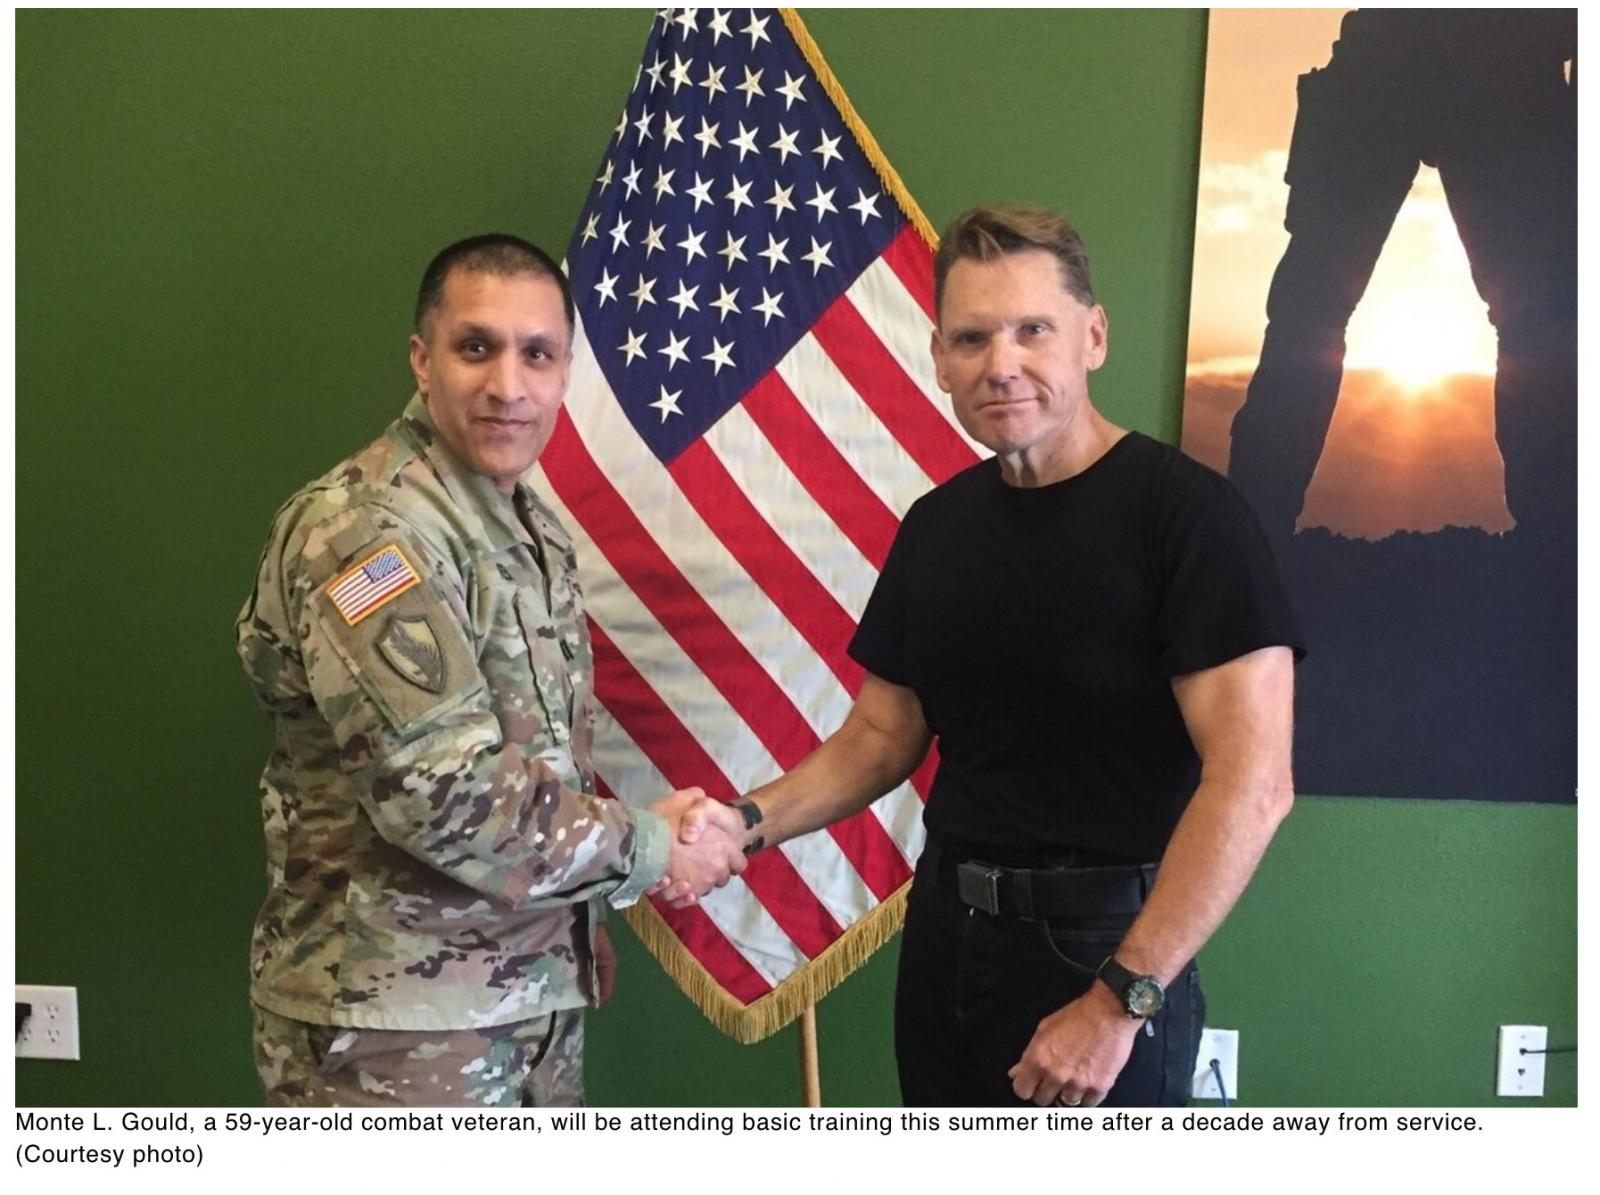  Your Army 59-year-old Afghanistan veteran will report to Army basic training this summer